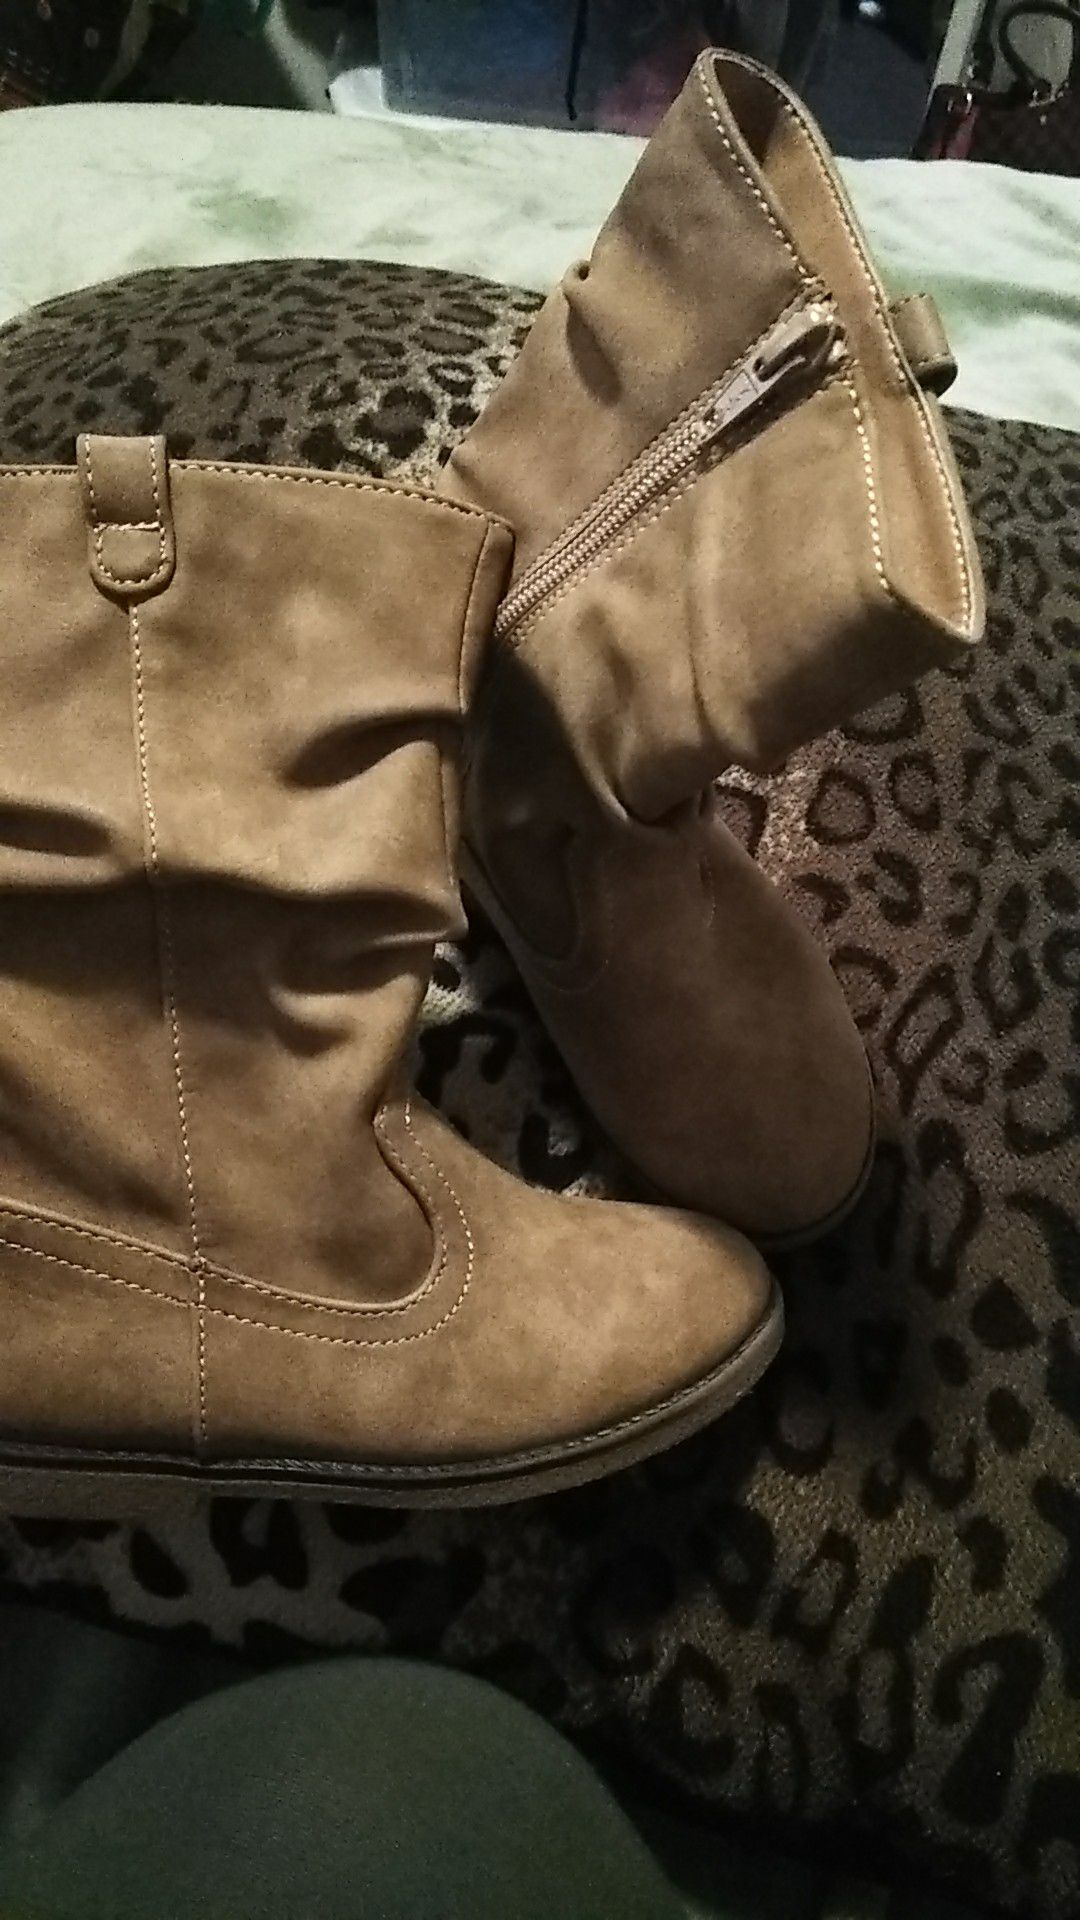 Girl boots from children's place 10c new condition pick up in oak cliff